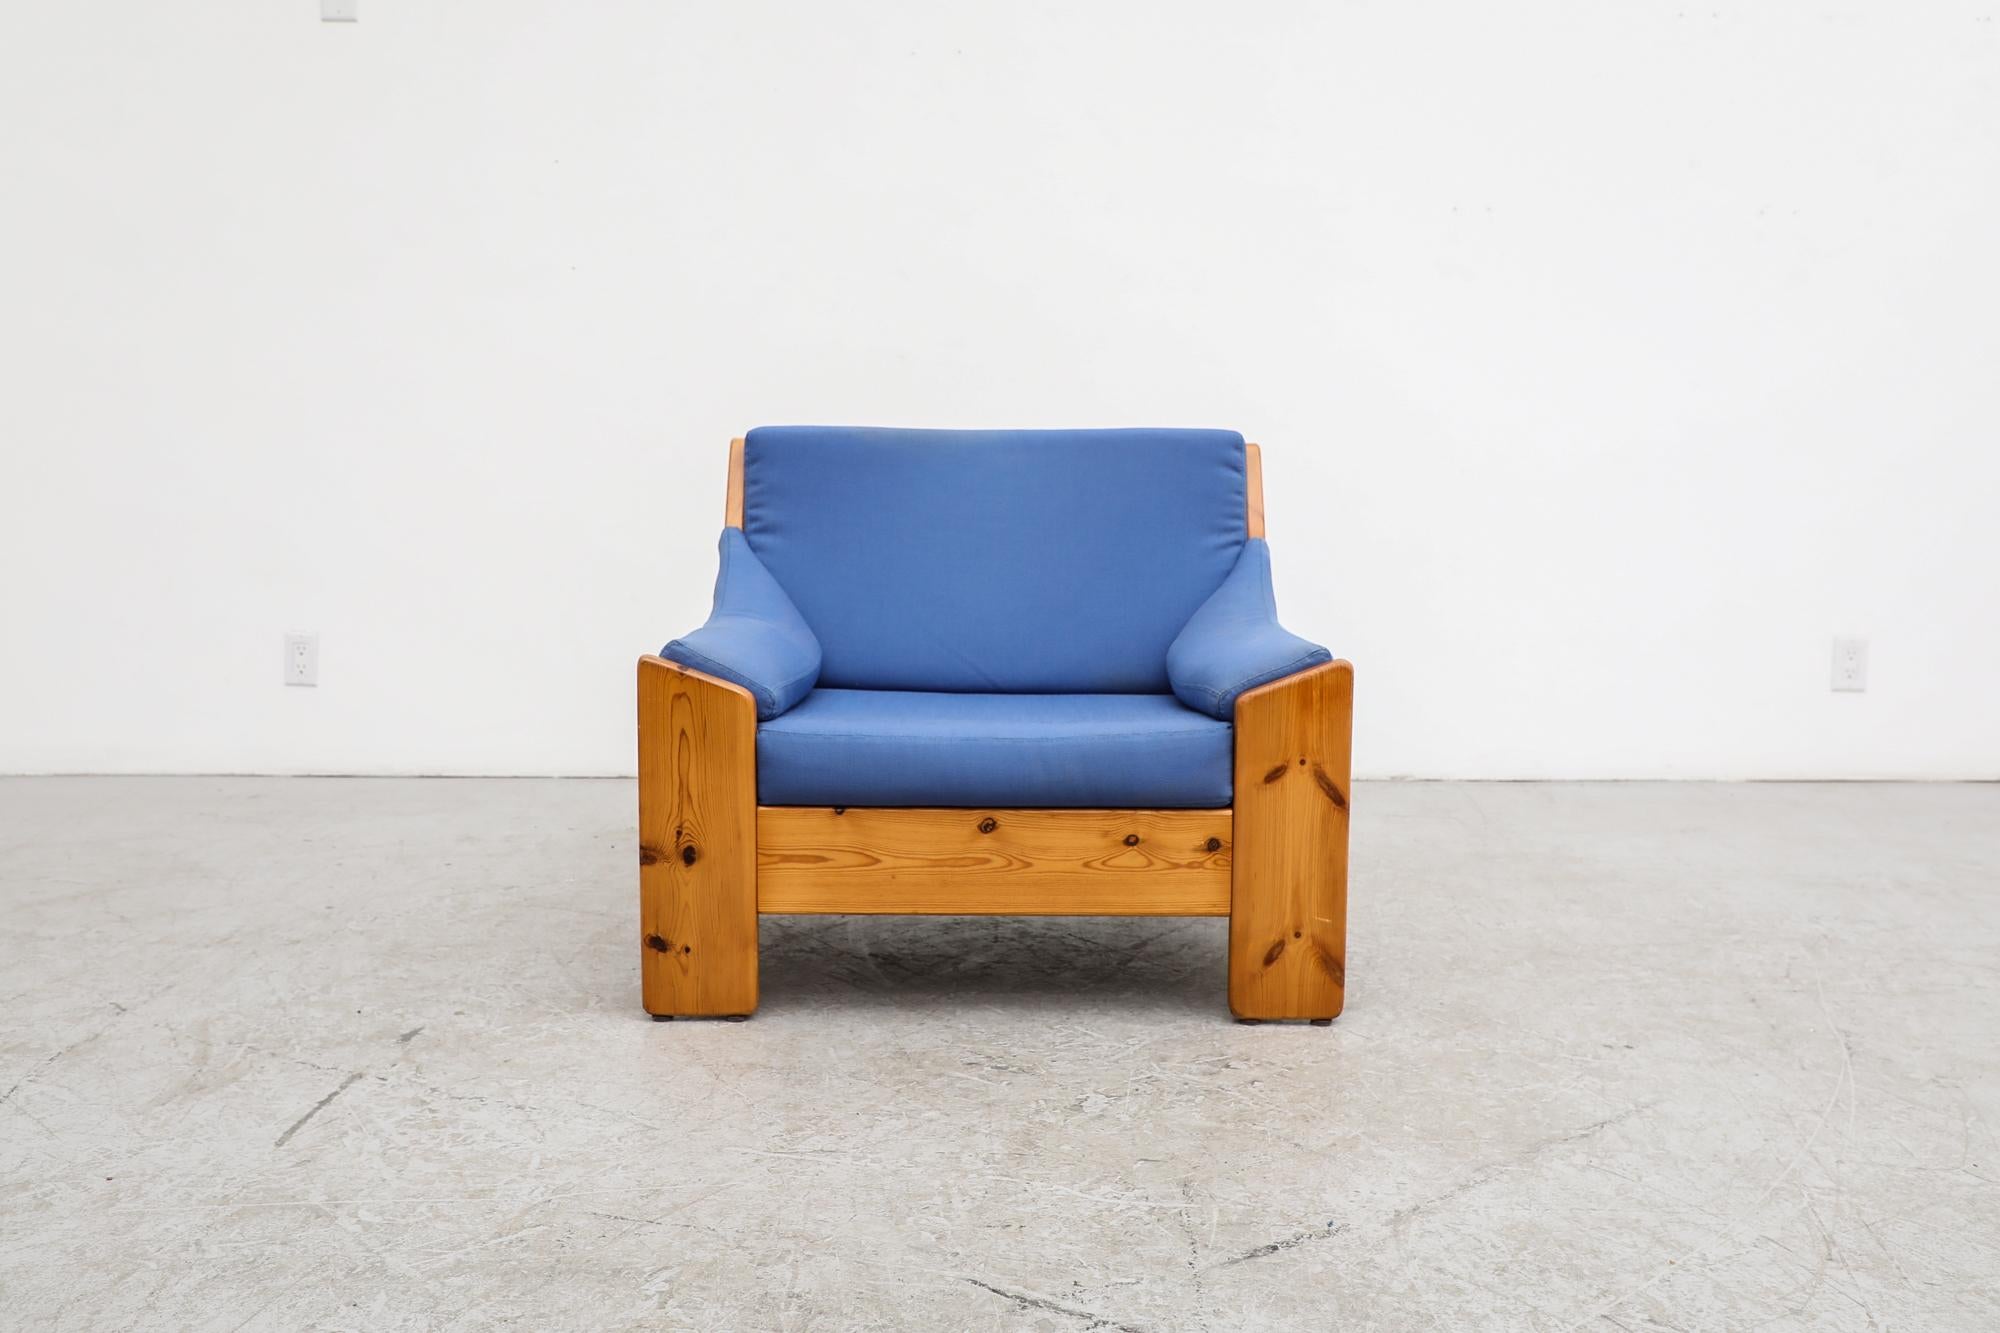 Dutch, Mid Century, Leolux lounge chair with original blue cushions and solid pine frame. In original condition with visible wear consistent with its age and use. Matching loveseats available (LU922432259522) as well as a matching pine coffee table